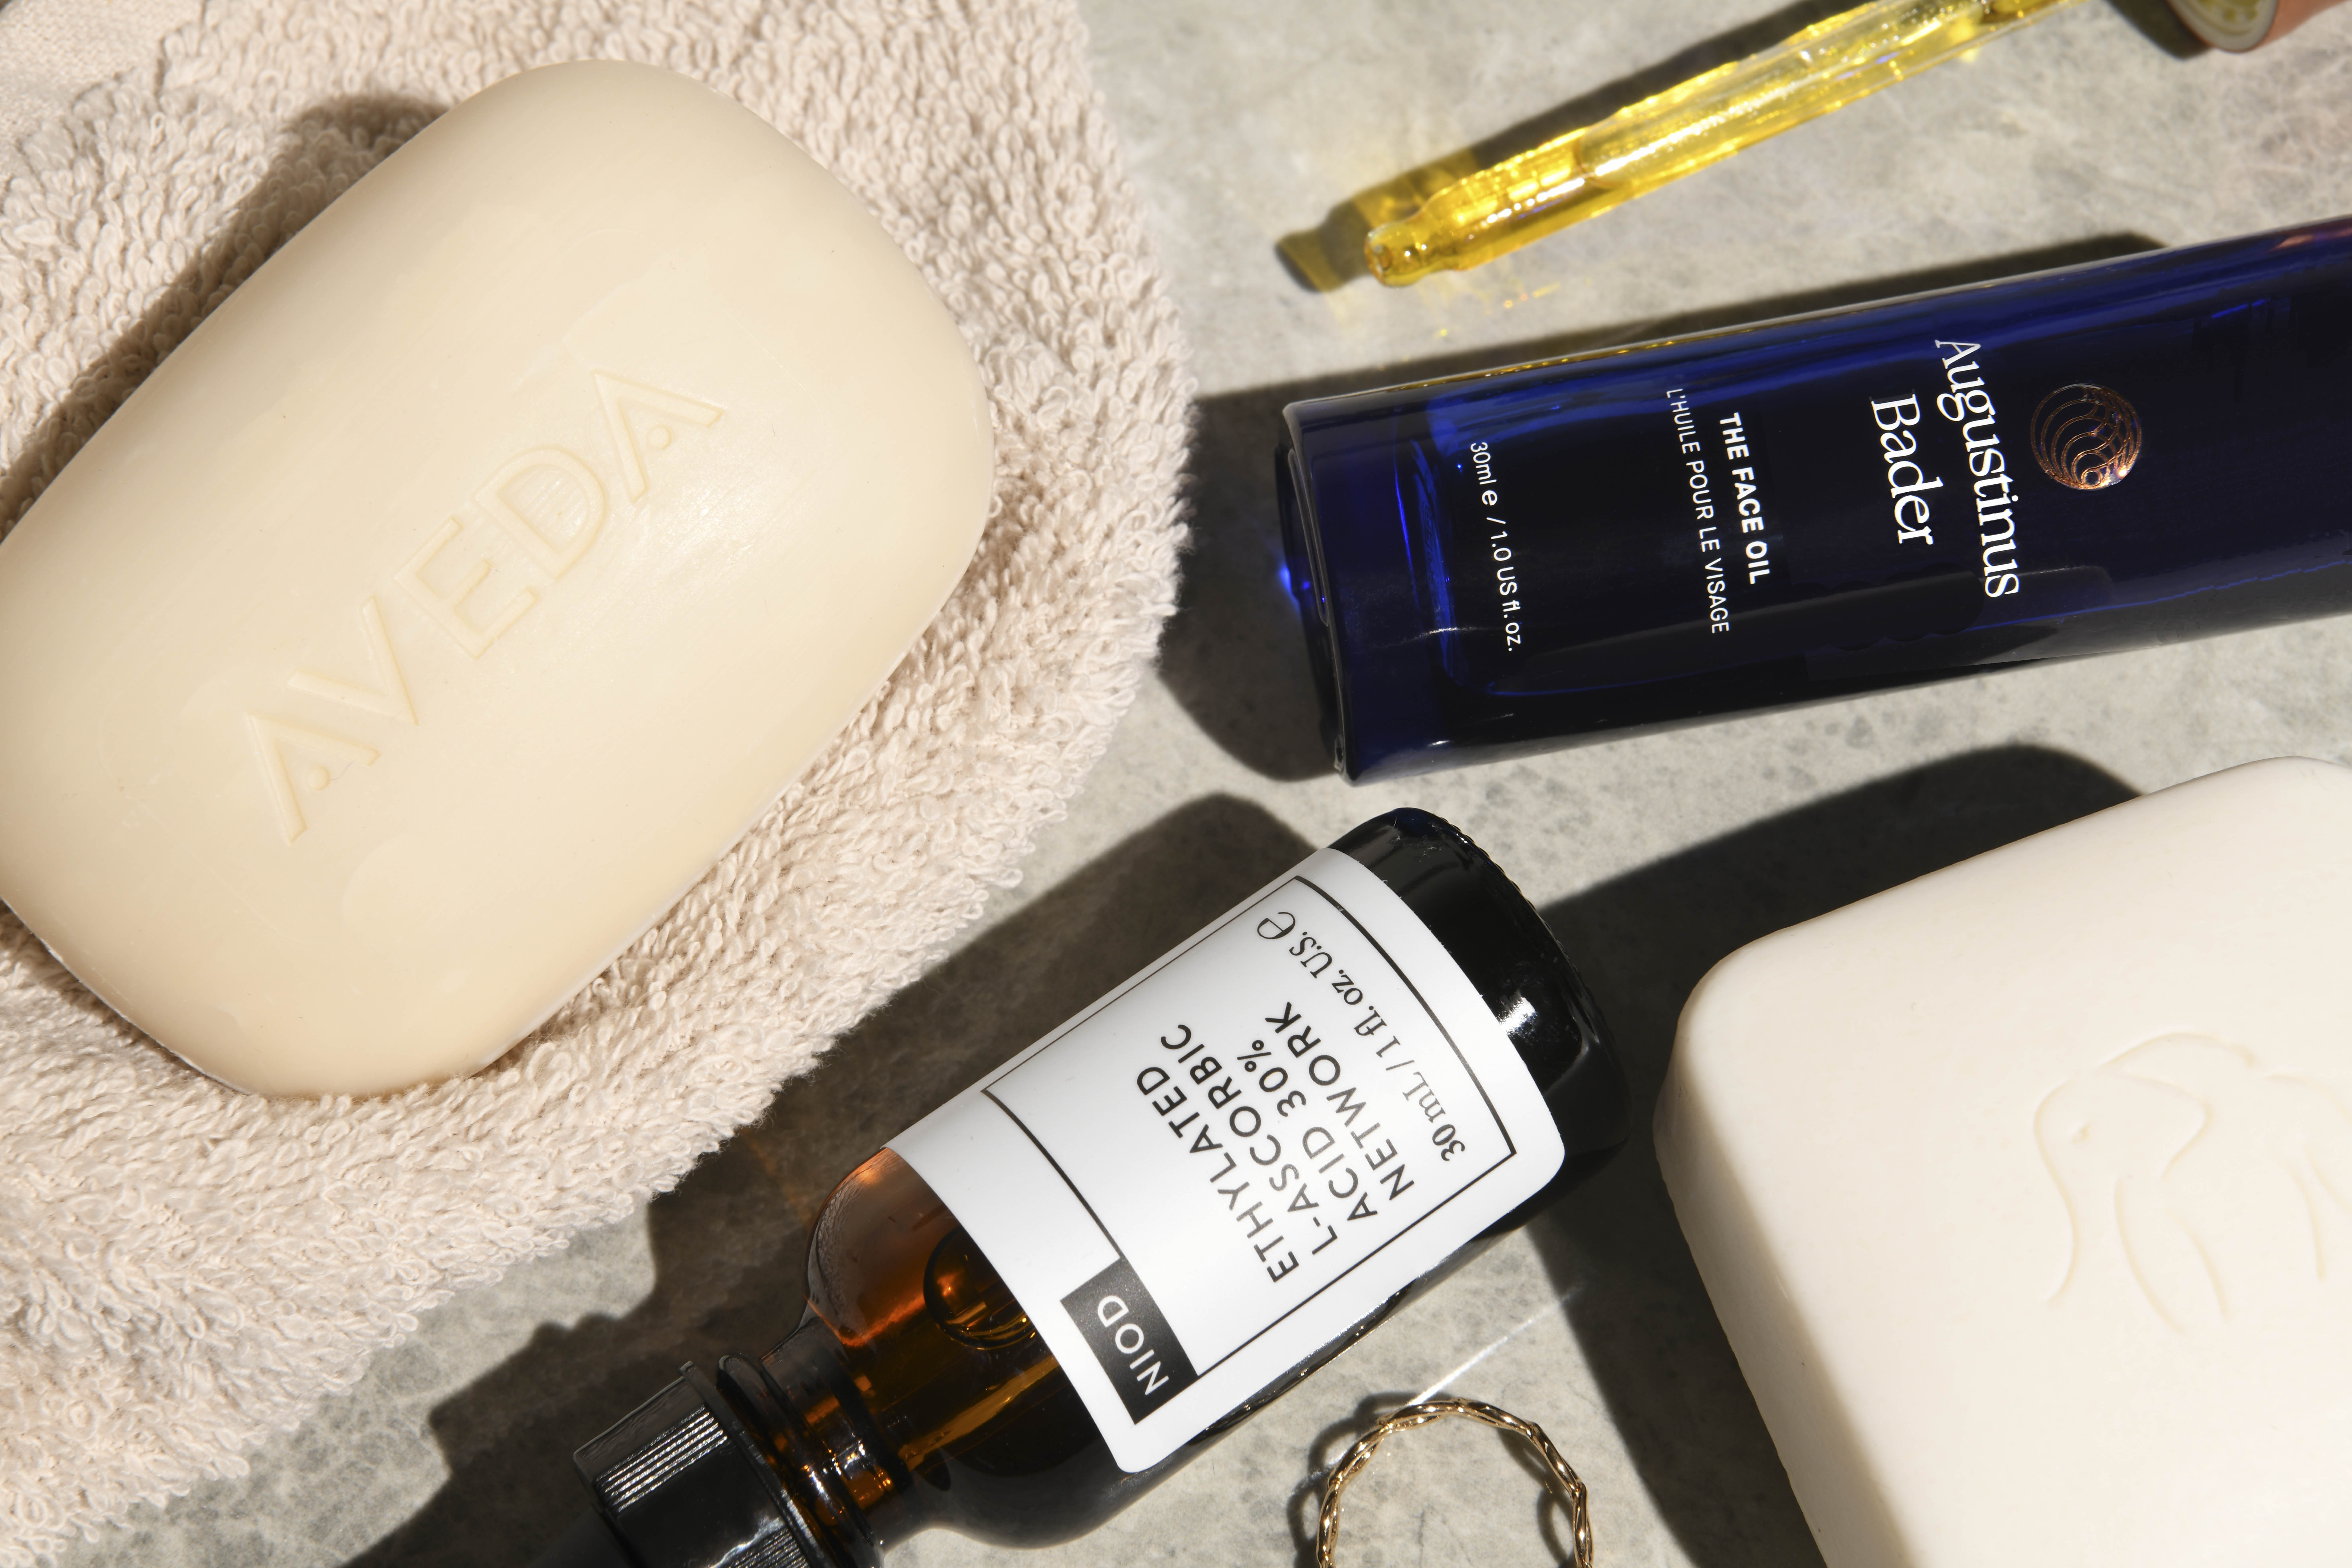 6 Waterless Beauty Buys Cleaning Up Our Routines